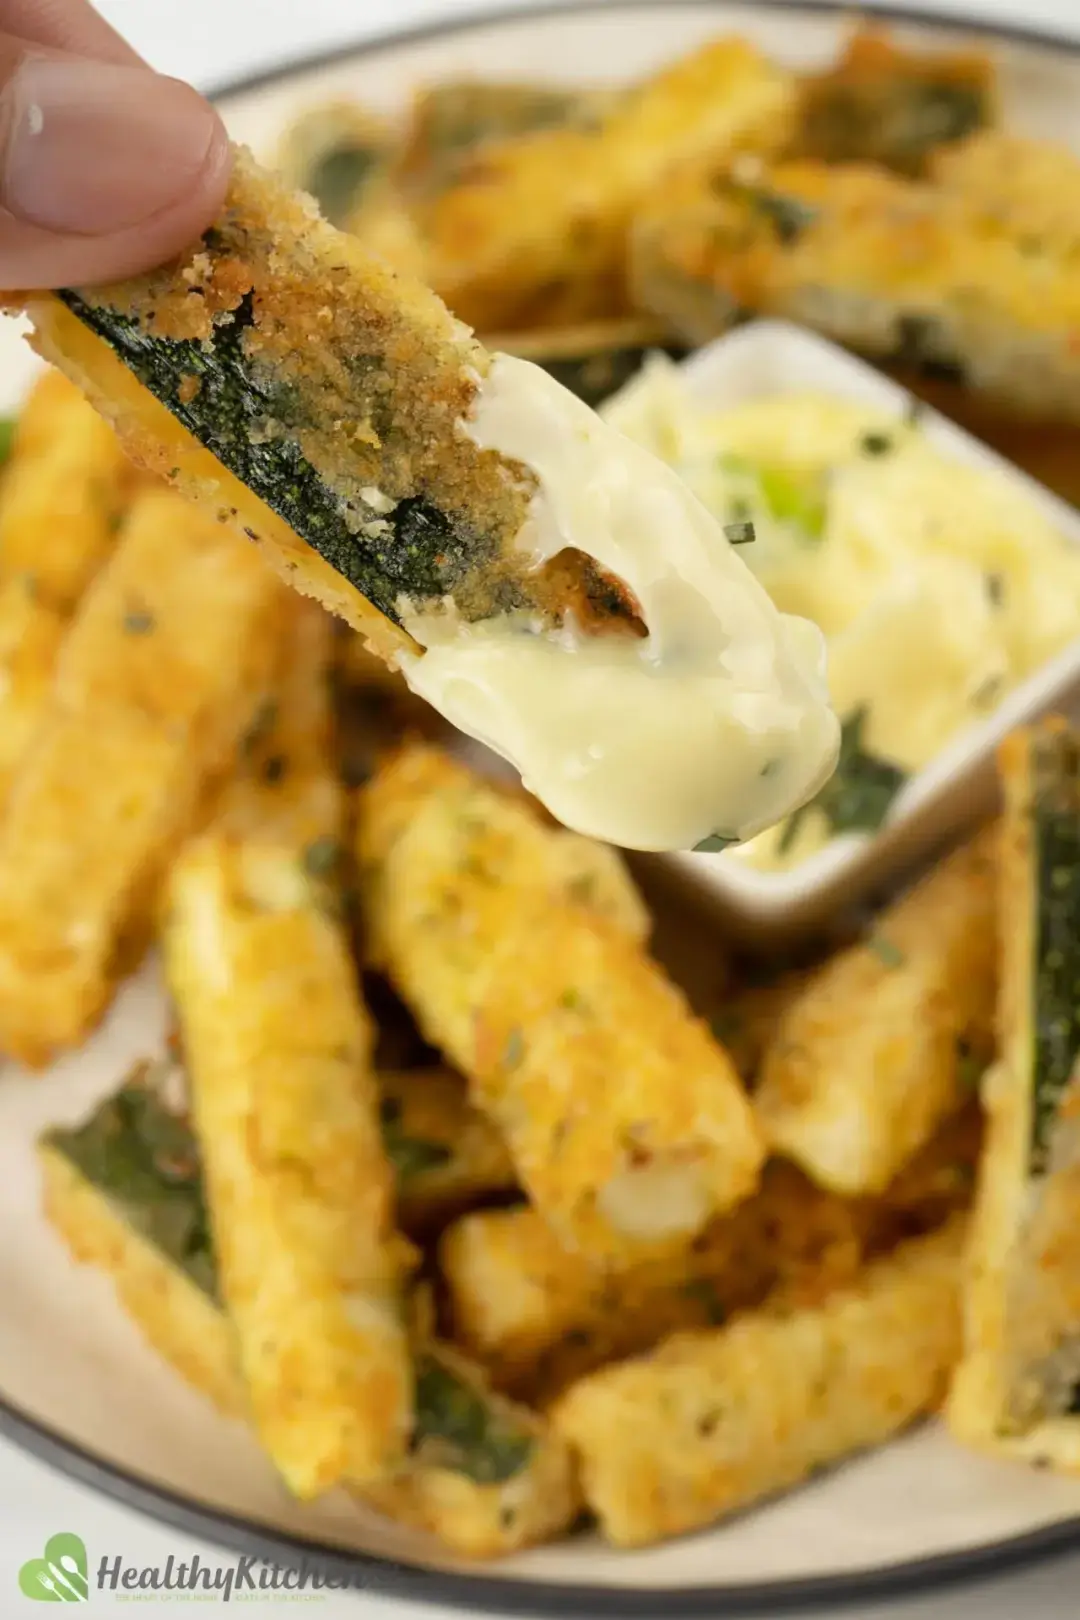 One zucchini fry dipped in mayonnaise, above a background full of zucchini fries